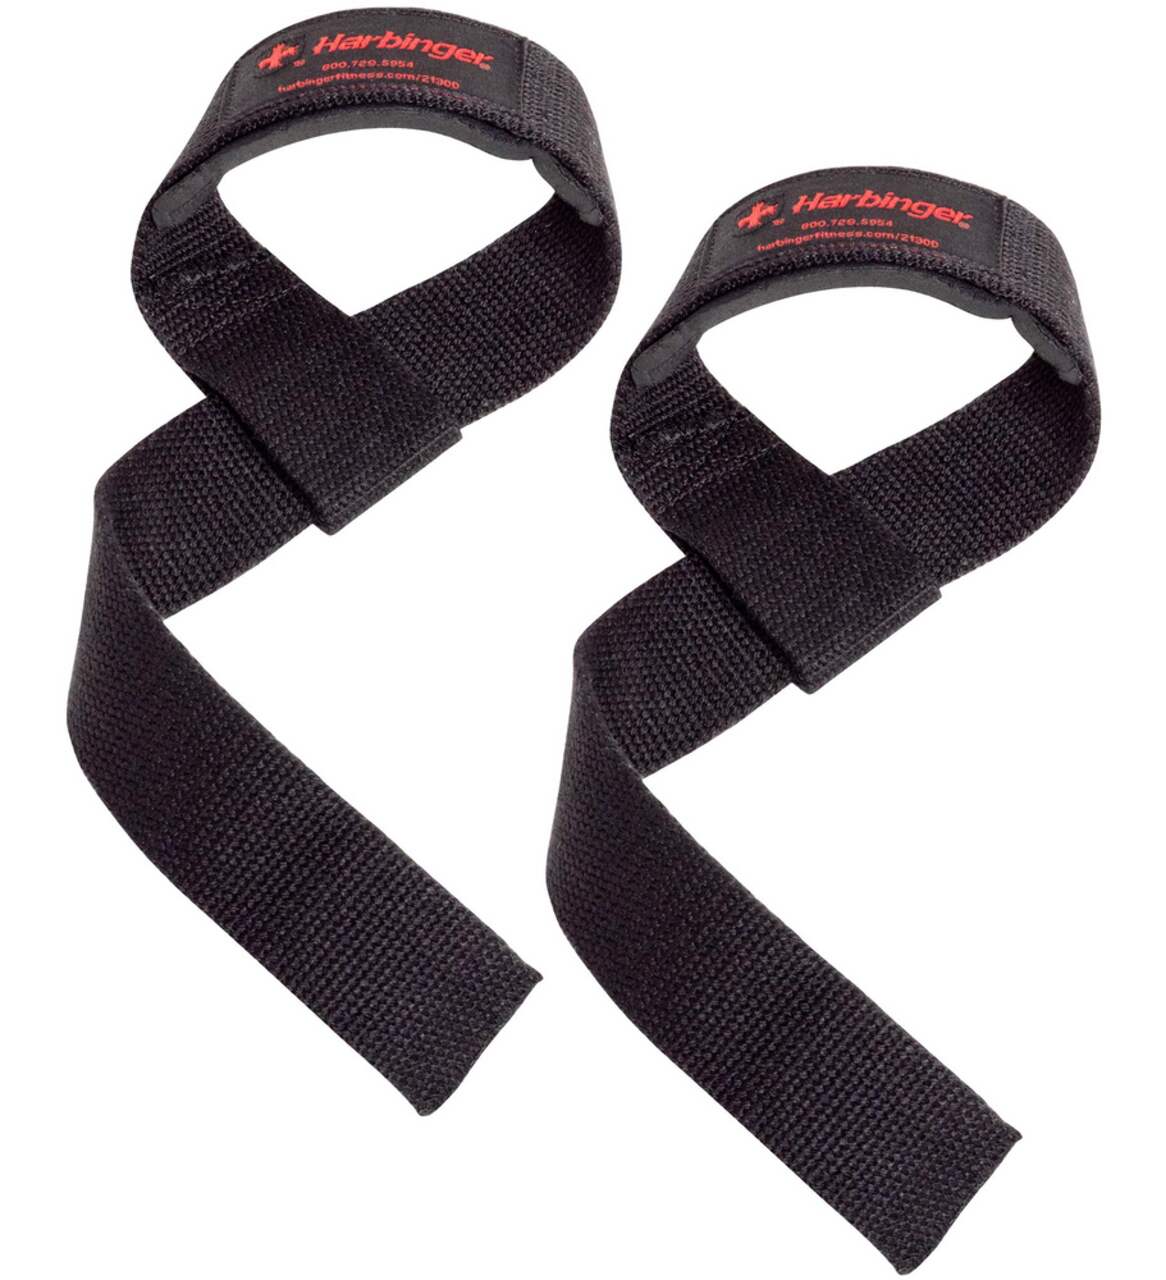 https://media-www.canadiantire.ca/product/playing/exercise/exercise-accessories/1840713/harbinger-padded-cotton-lifting-straps-ade3a93a-1cb4-462c-bc75-8e93bb7d11f7.png?imdensity=1&imwidth=640&impolicy=mZoom